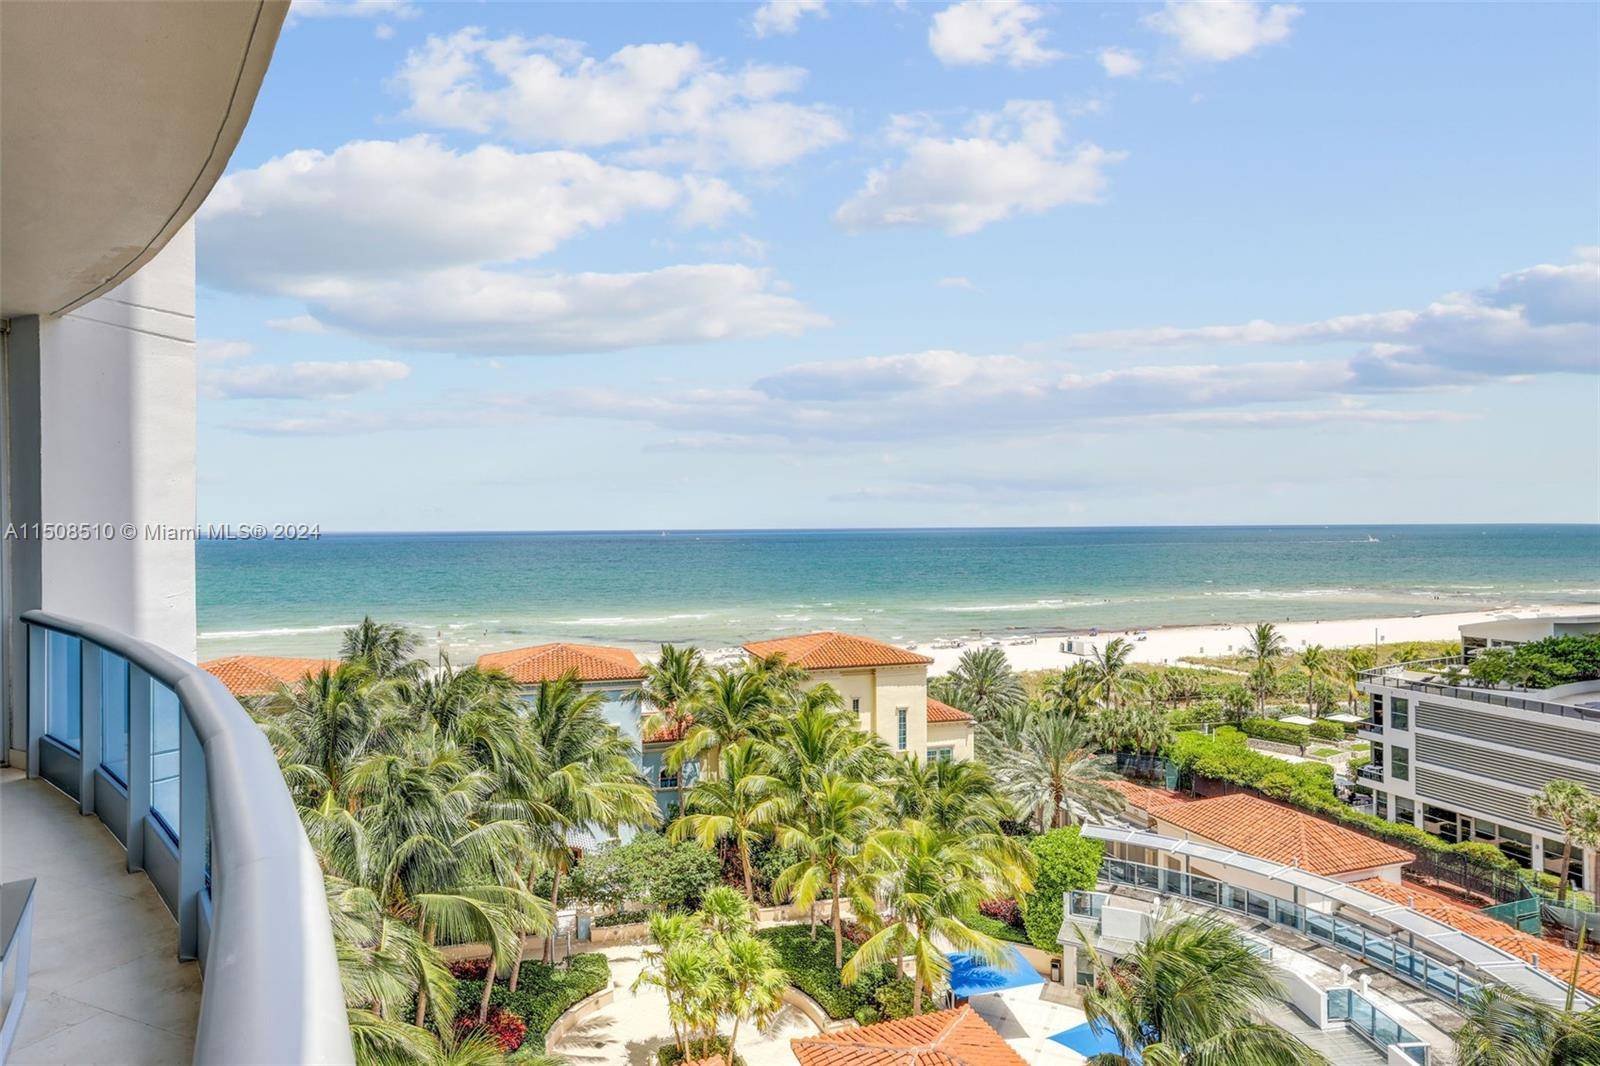 Enjoy stunning direct oceanfront views from this impressive unit at the exclusive Bath Club.